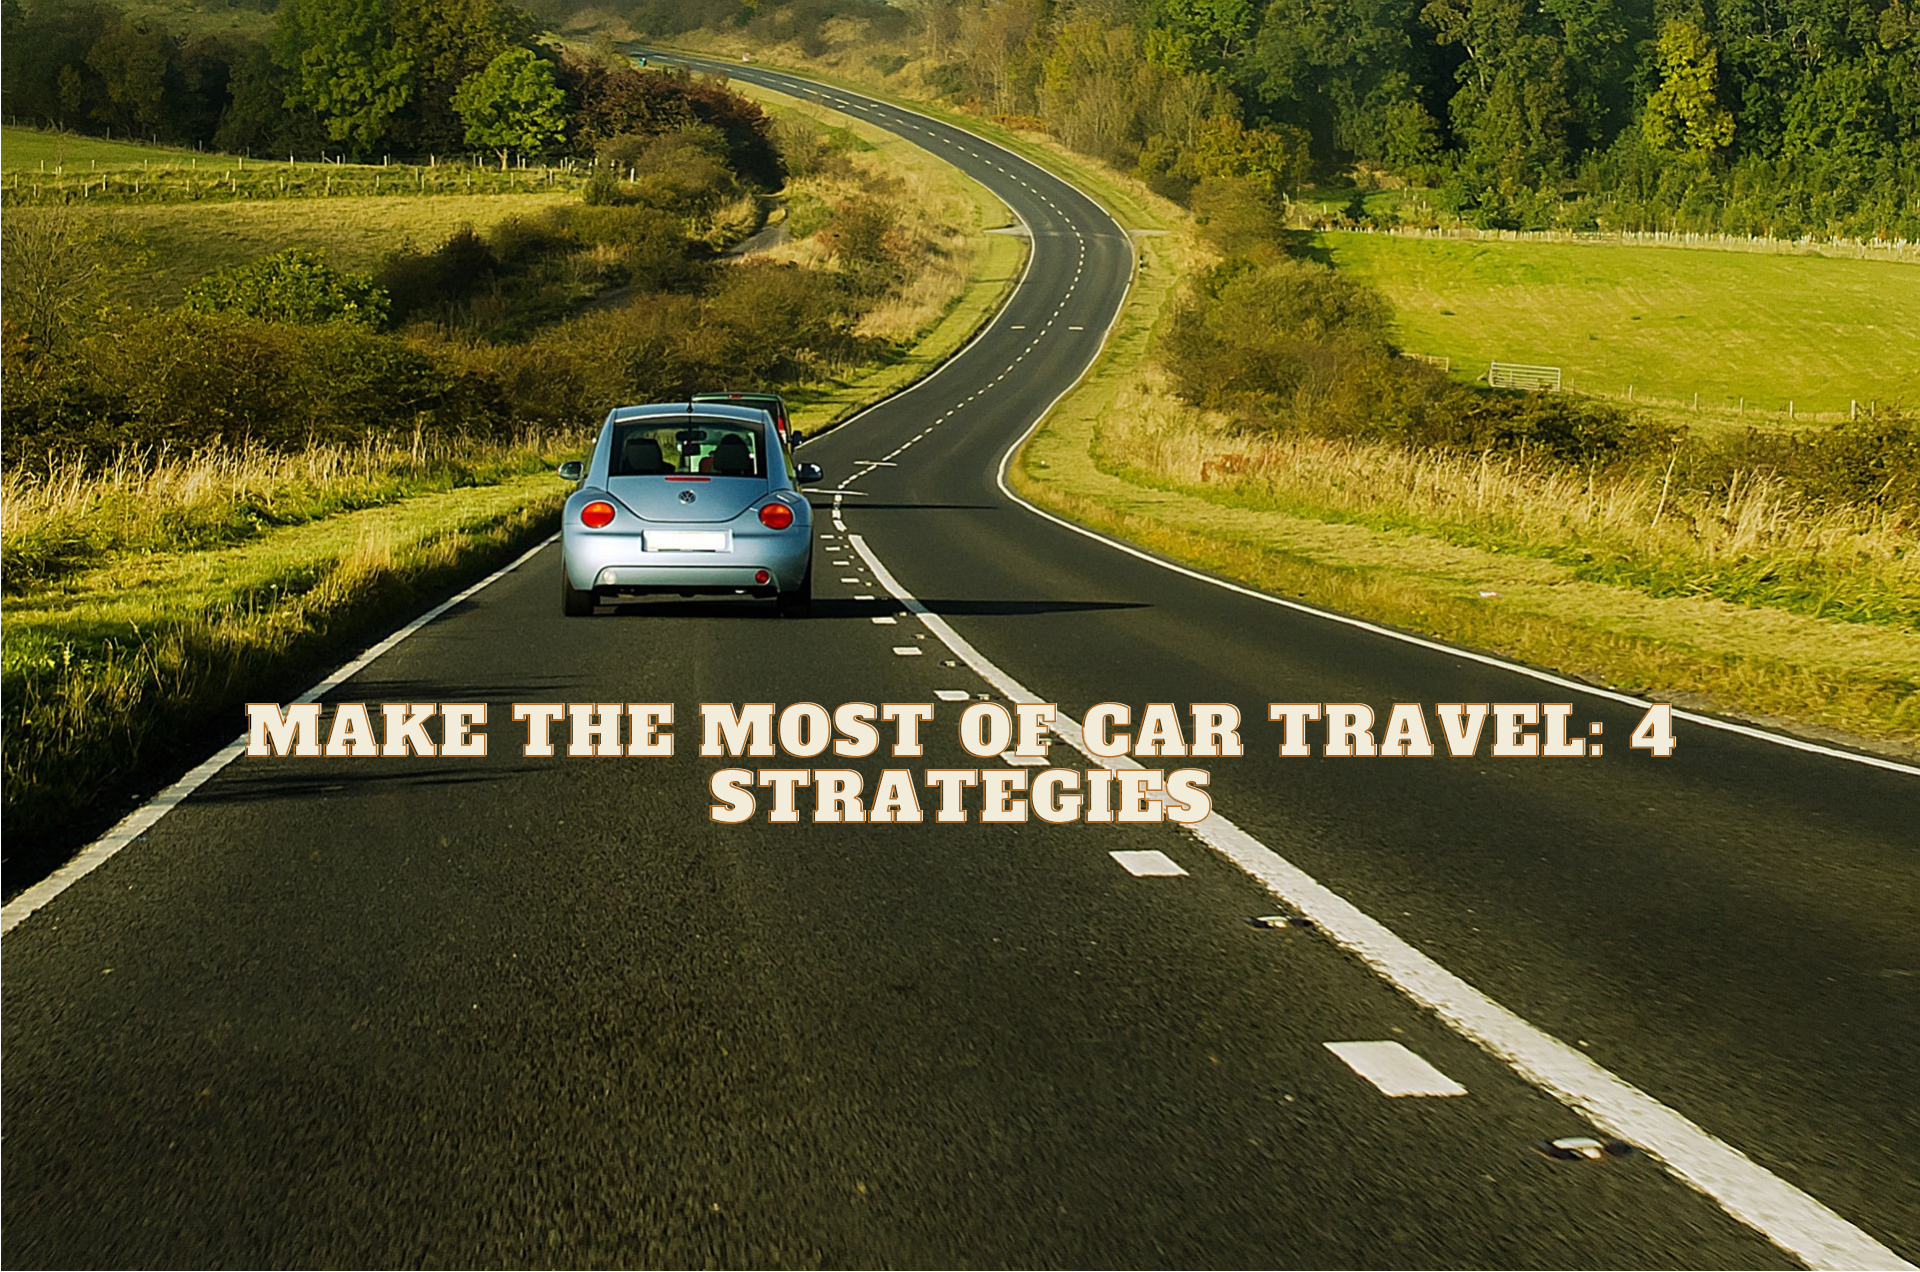 Make the Most of Car Travel 4 Strategies